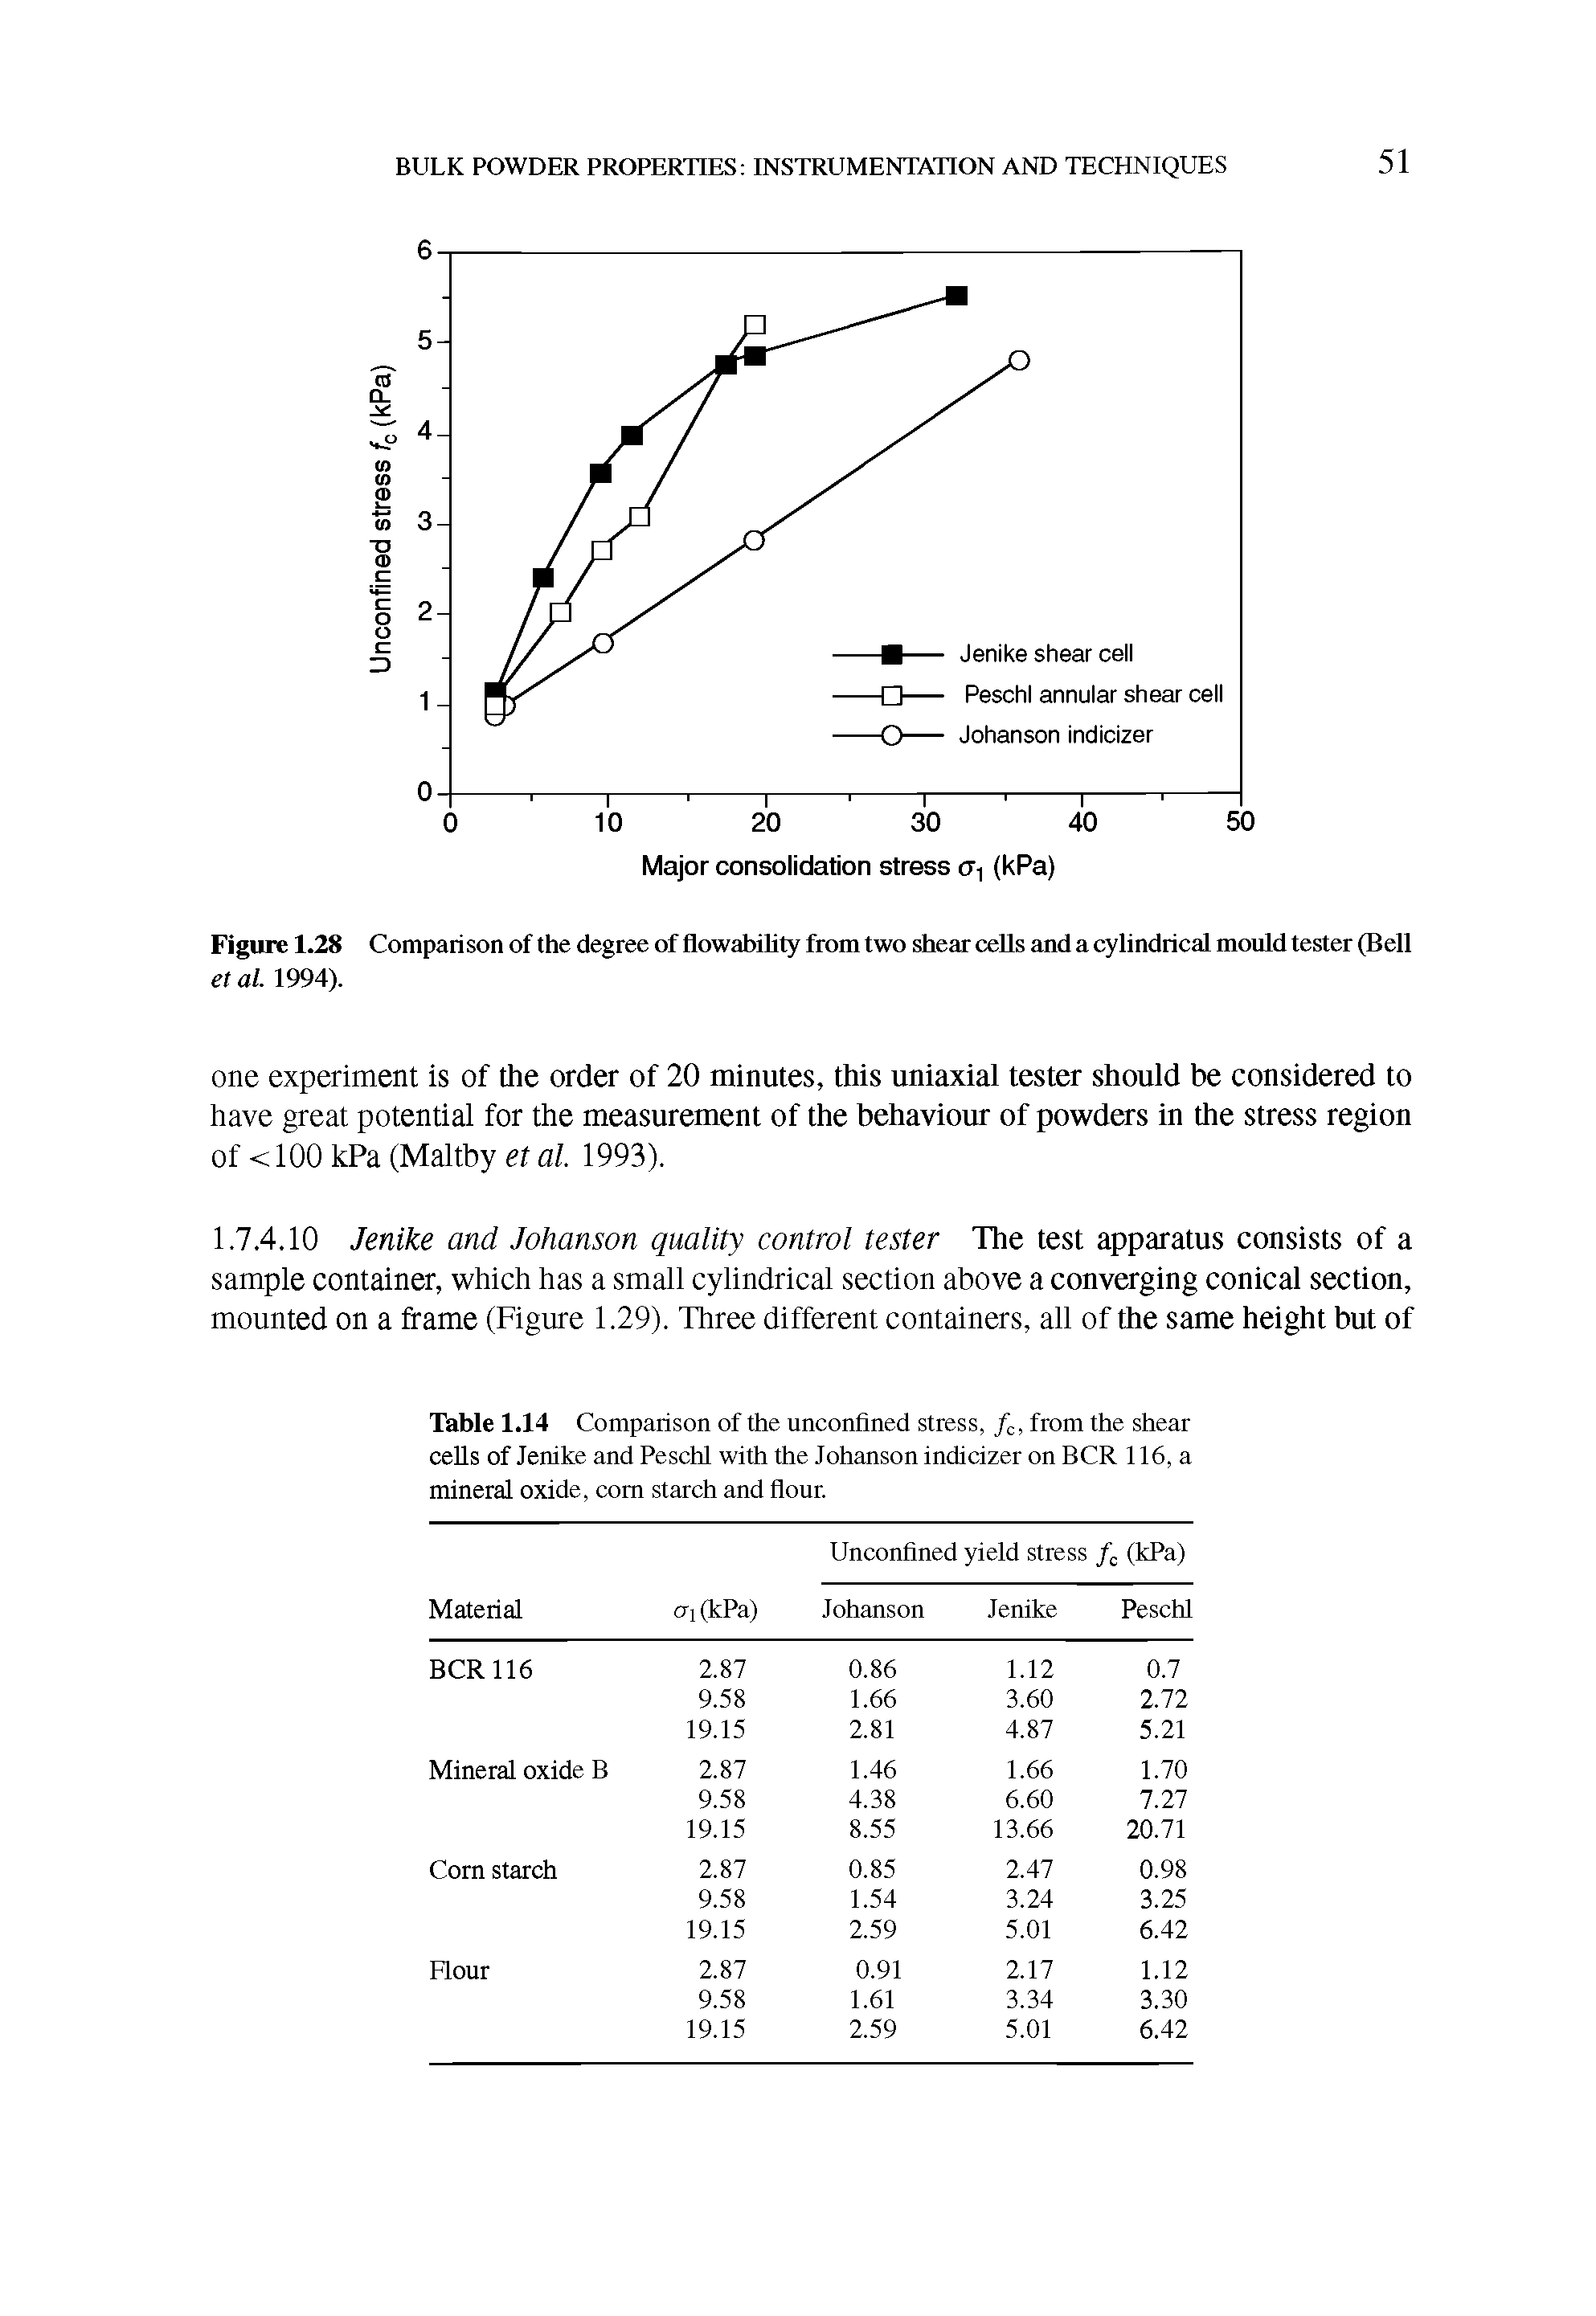 Table 1.14 Comparison of the unconfined stress, /c, from the shear cells of Jenike and Peschl with the Johanson indicizer on BCR 116, a mineral oxide, com starch and flour.